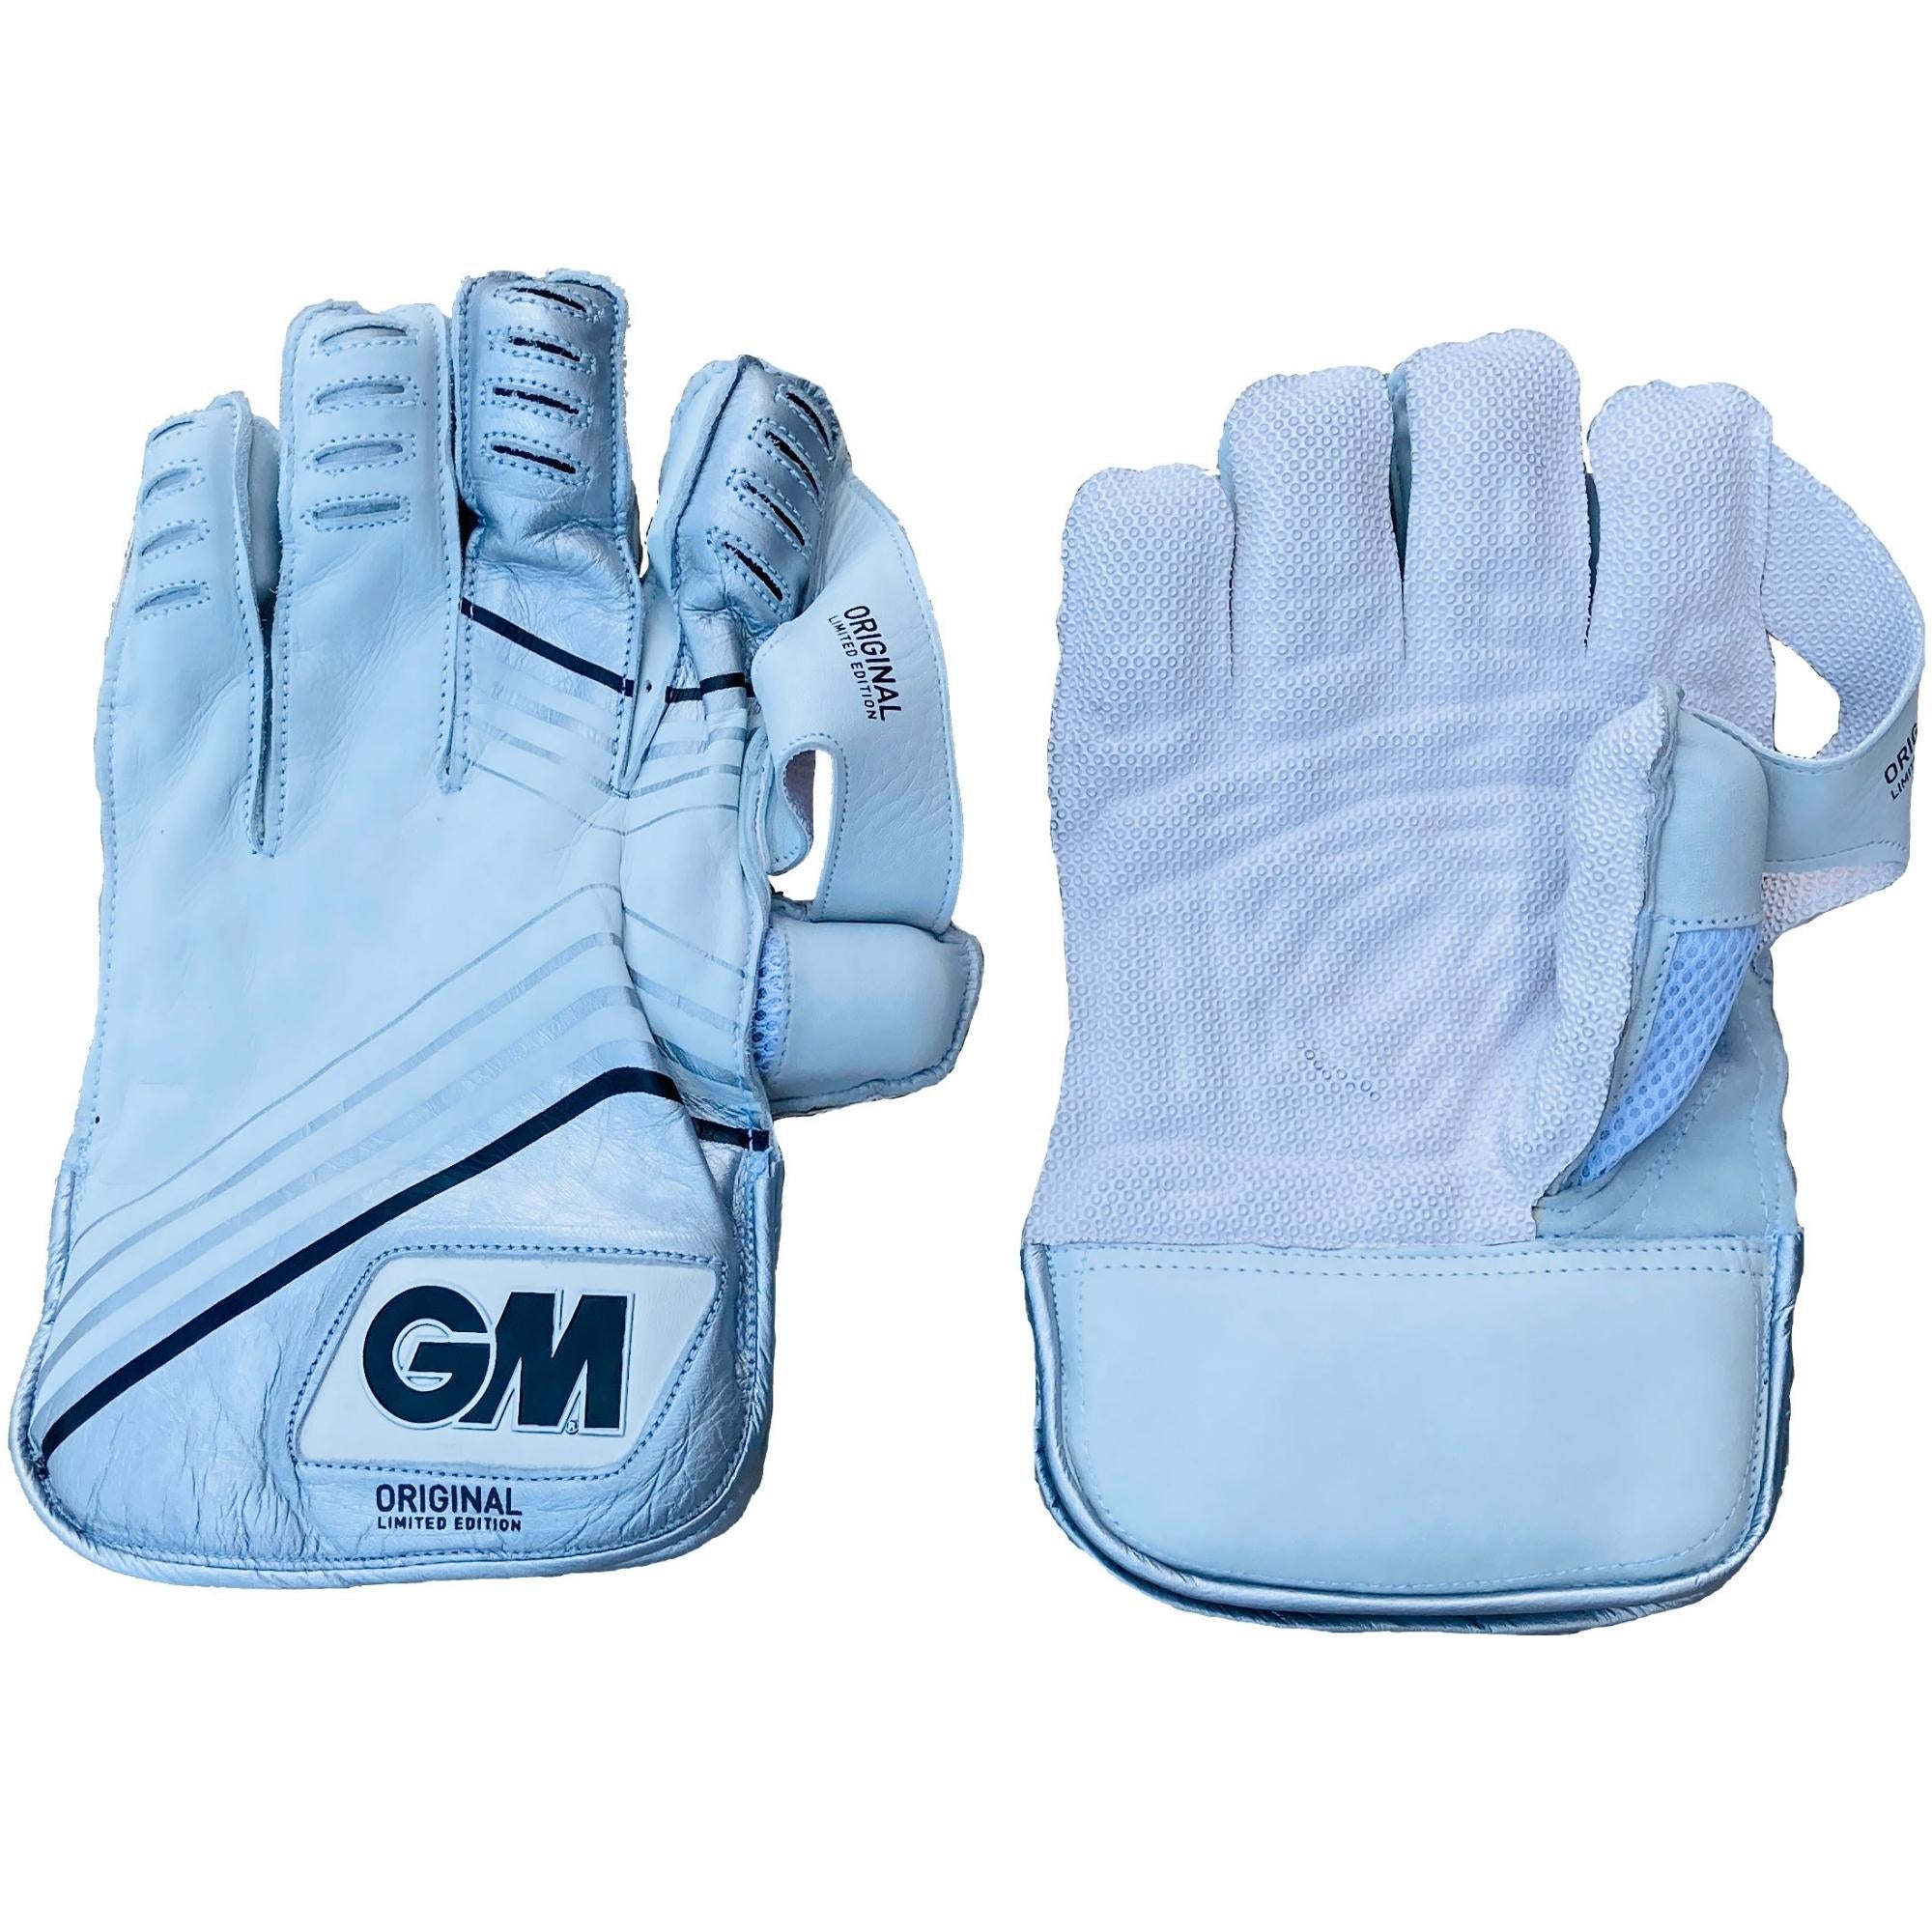 GM Wicket Keeping Gloves | GM Original Limited Edition